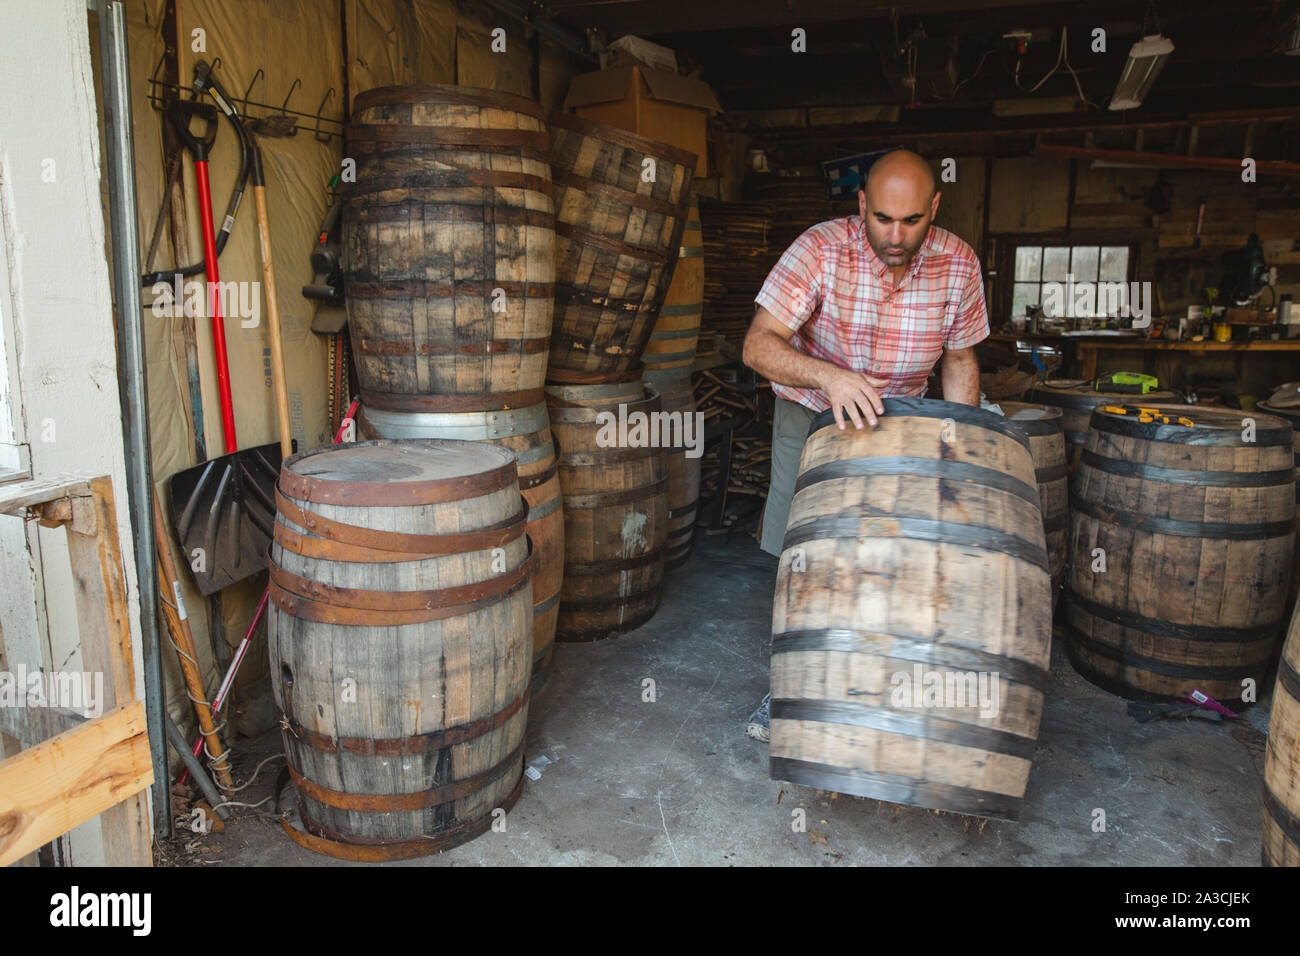 A man wheels a large wood bourbon barrel from a stack in a garage Stock Photo